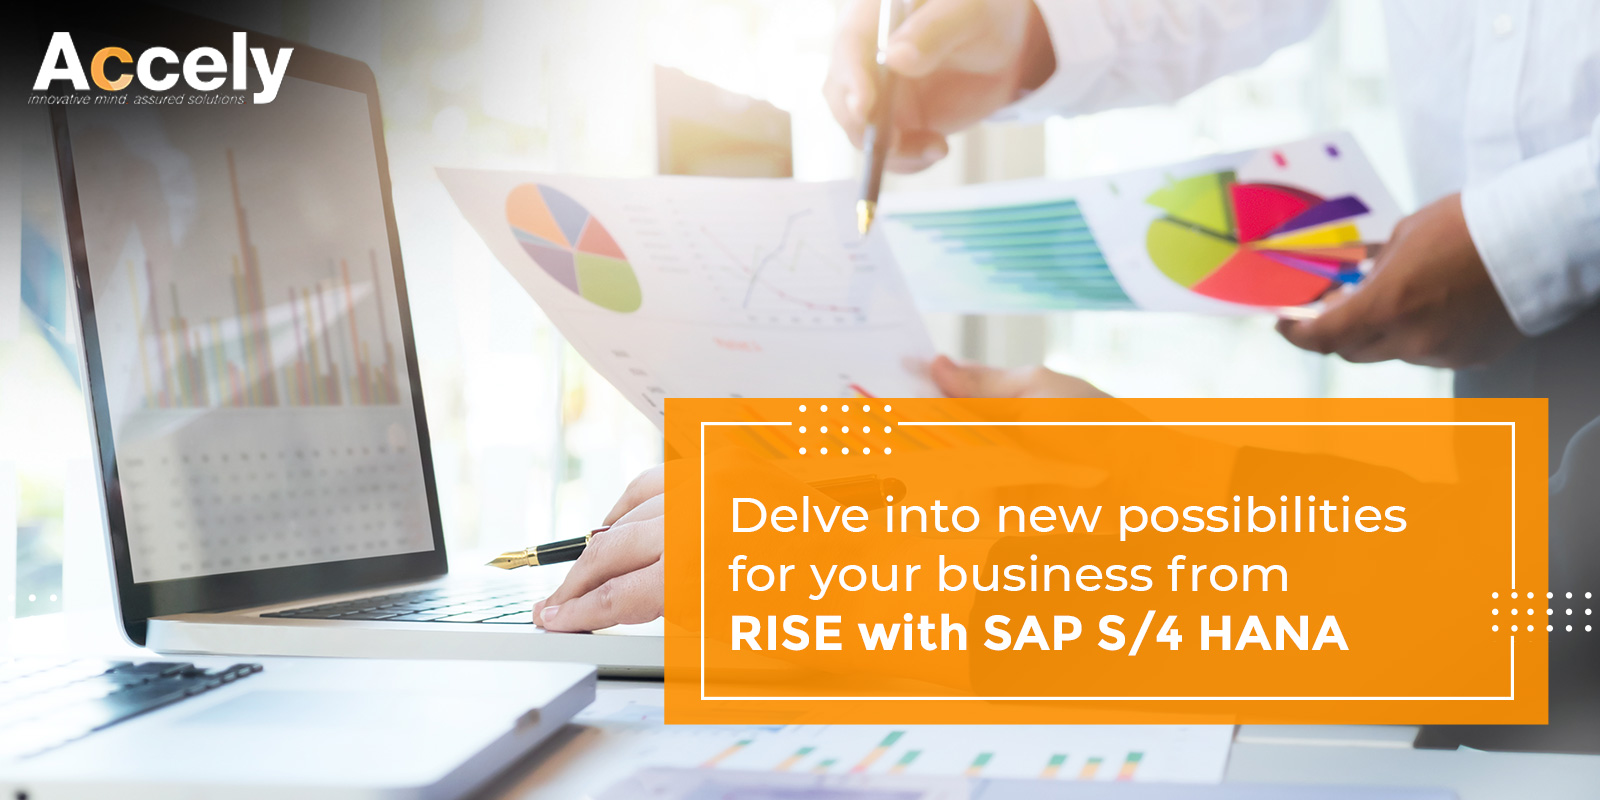 Delve into new possibilities for your business from RISE with SAP S/4 HANA